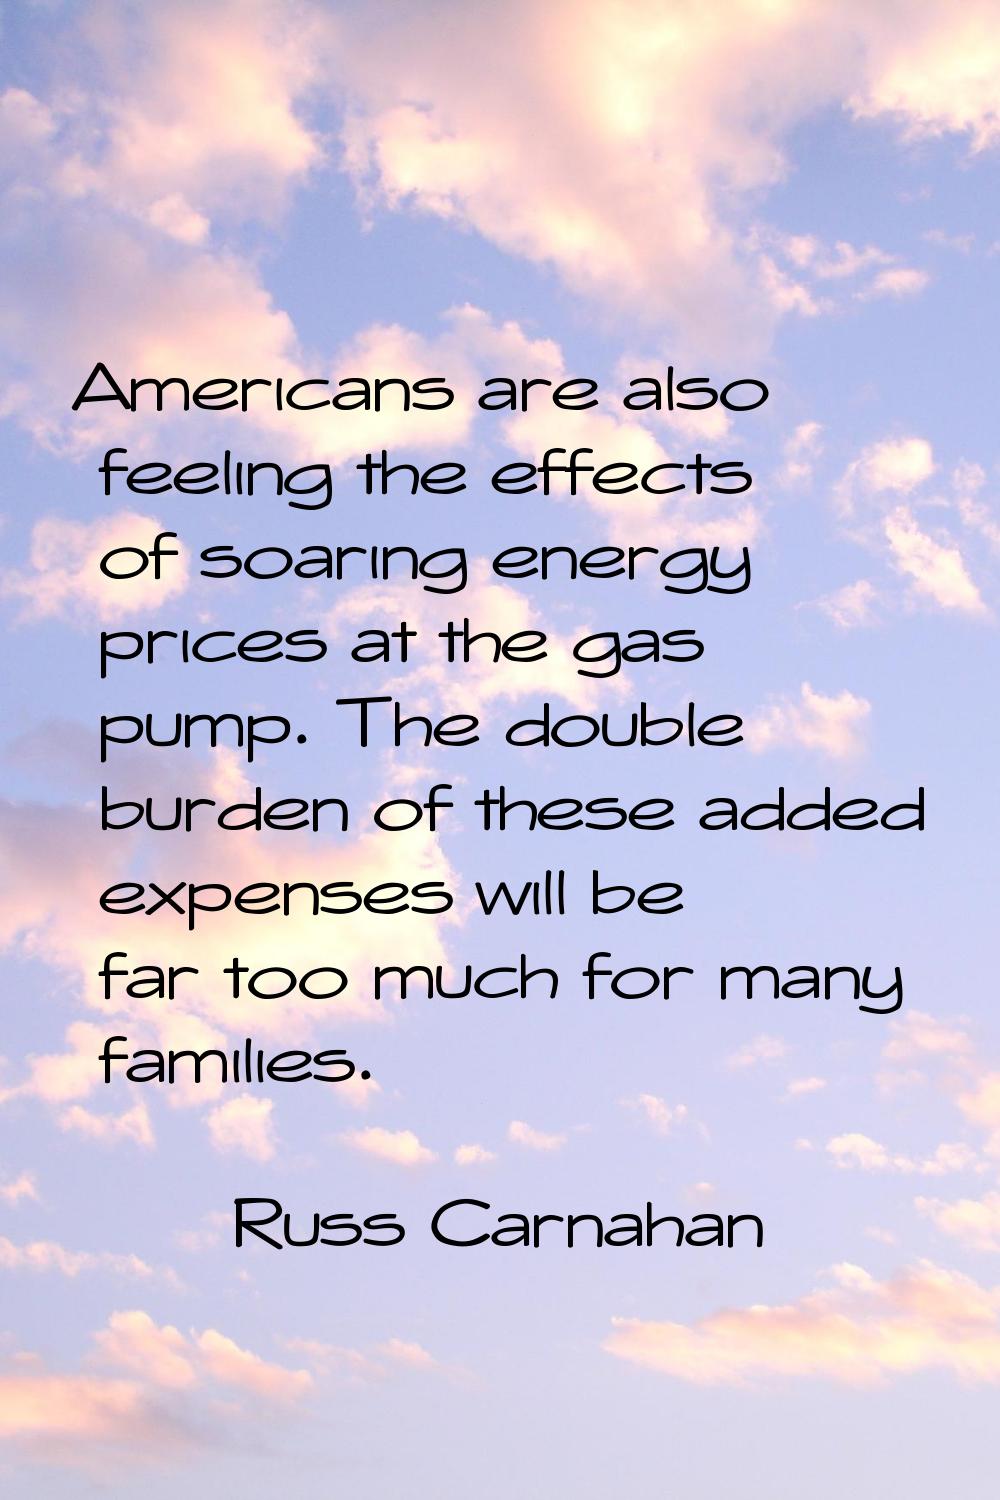 Americans are also feeling the effects of soaring energy prices at the gas pump. The double burden 